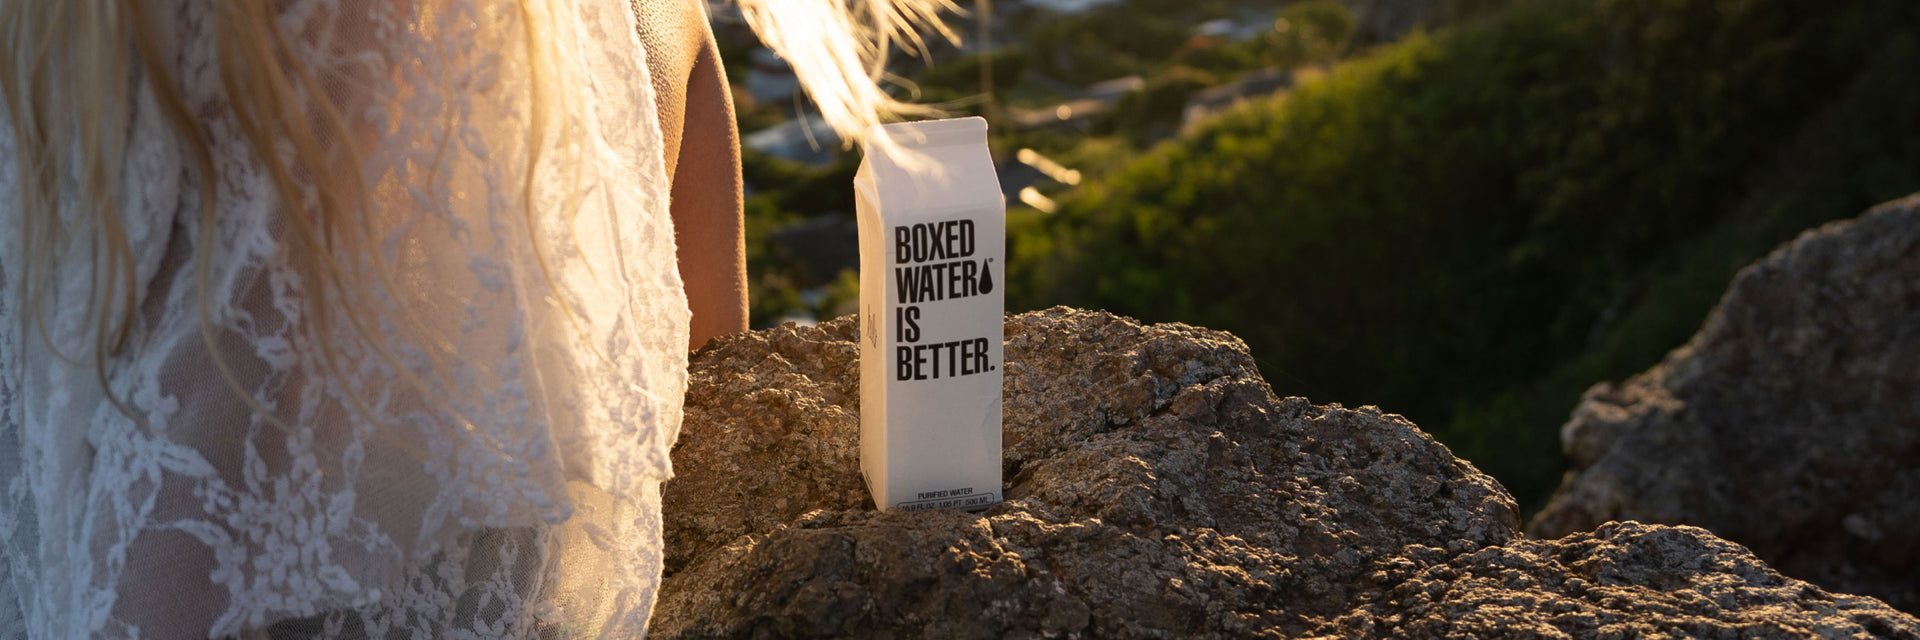 Boxed Water is Better on Mountain